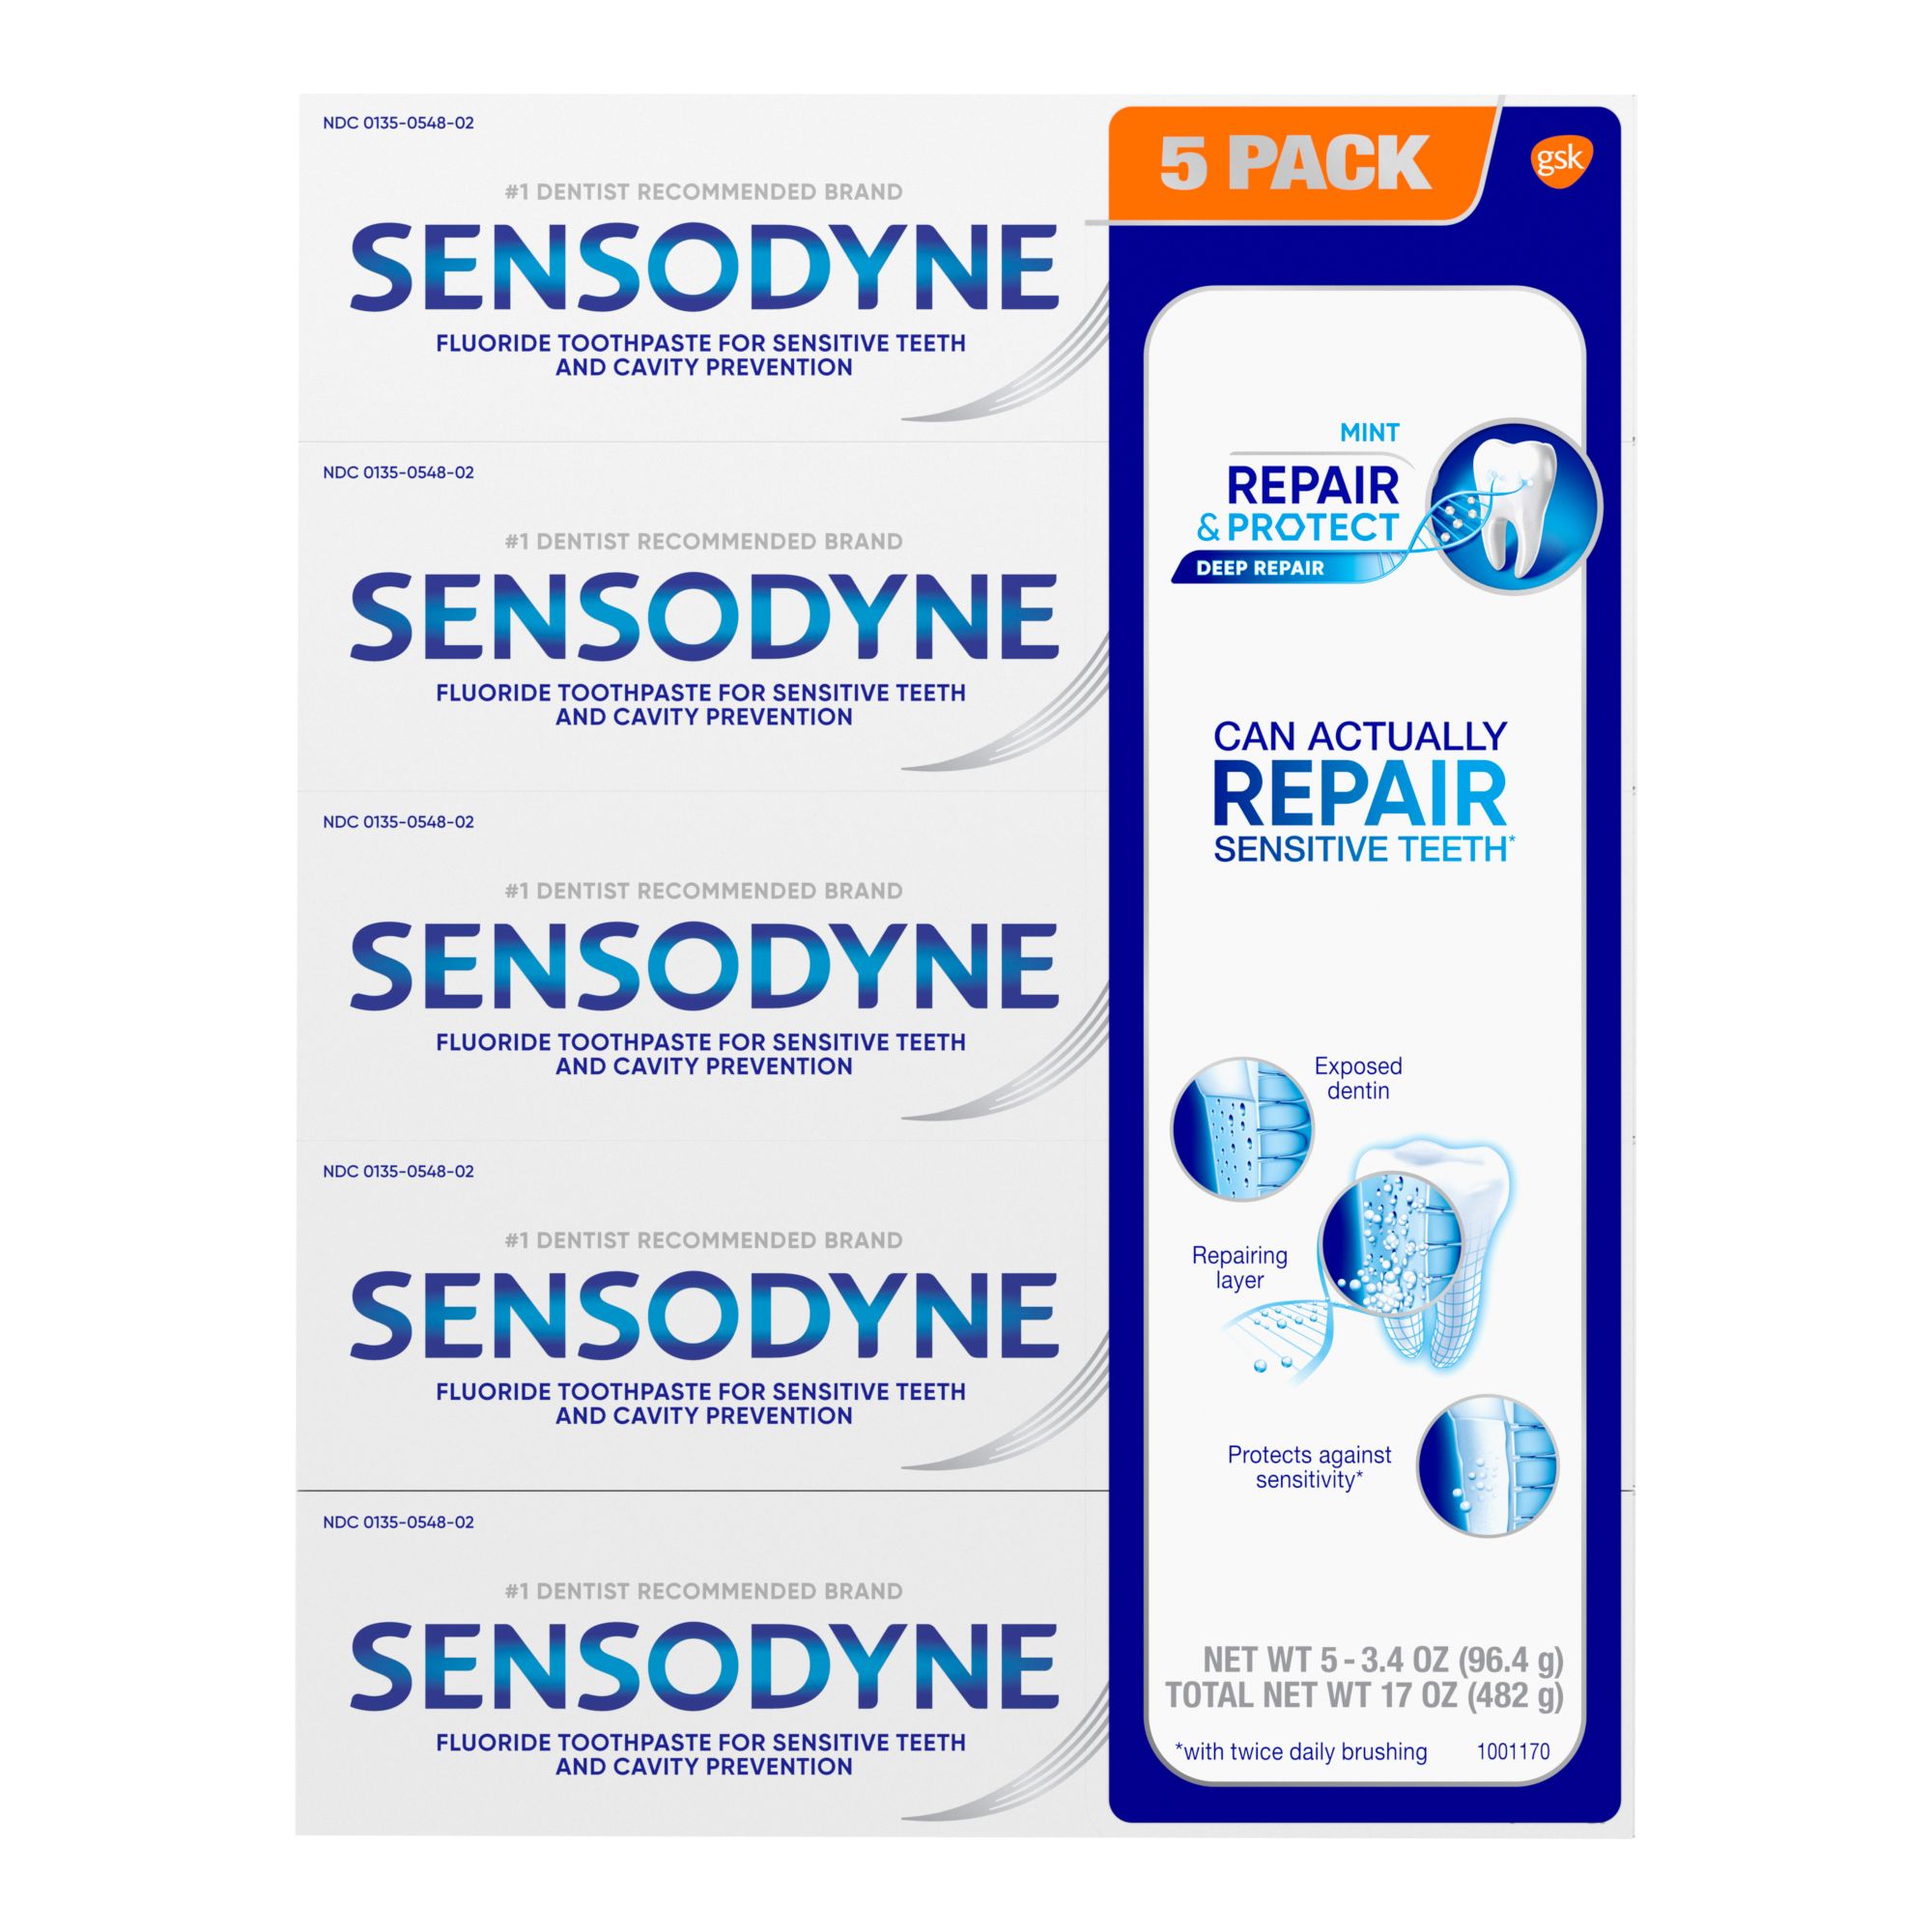 SENSODYNE DEEP CLEAN TOOTH BRUSH 70/-- - Oral Care- Personal Care